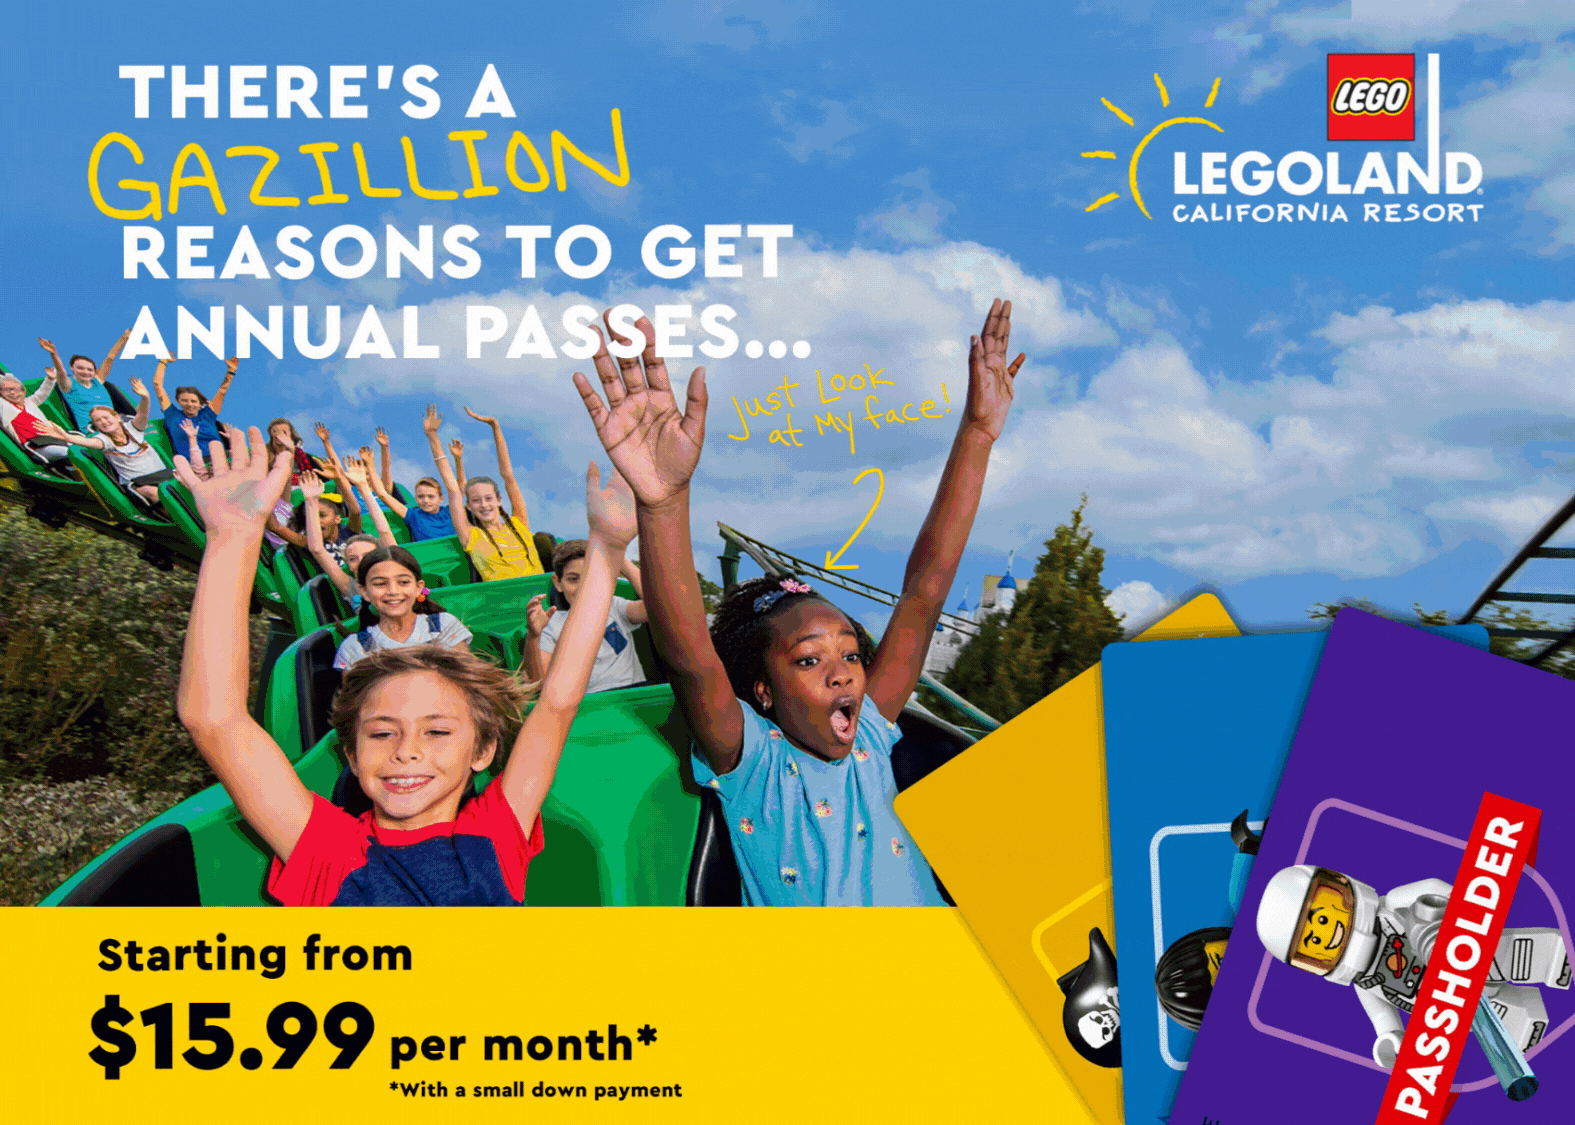 Annual Passes Starting from $15.99 per month